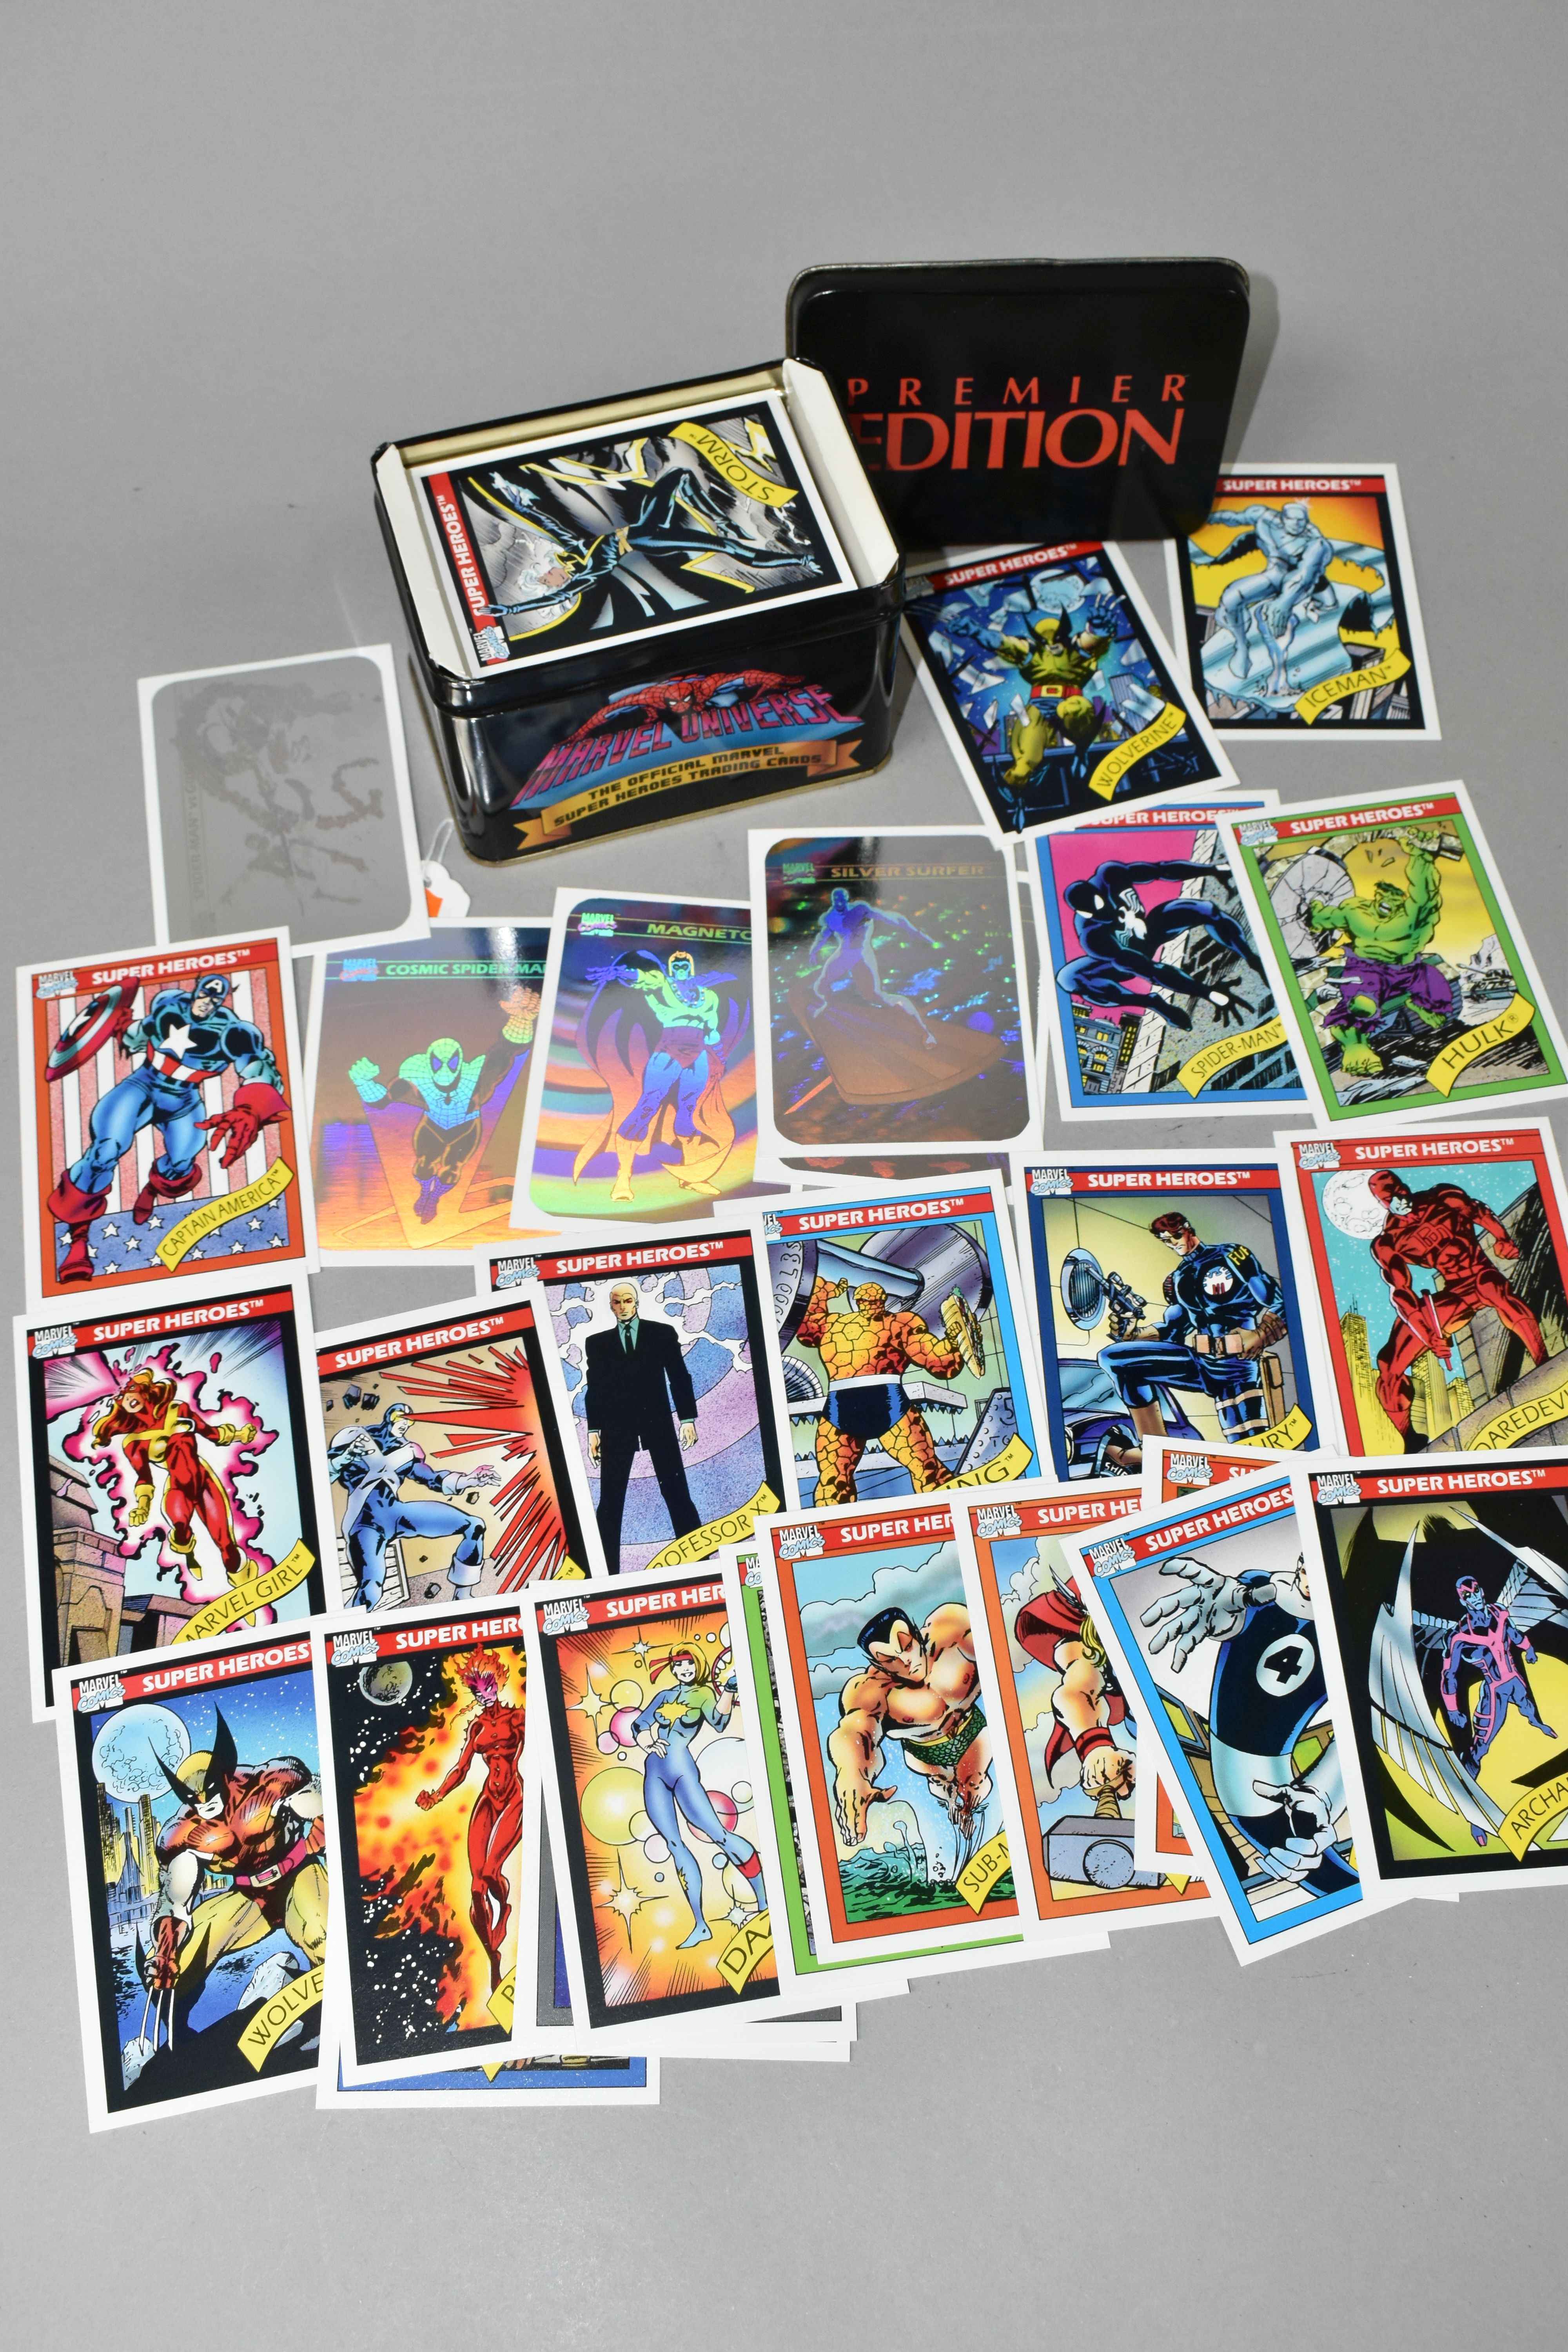 MARVEL UNIVERSE CARDS SERIES ONE PREMIER EDITION, all cards are present including the holos, and are